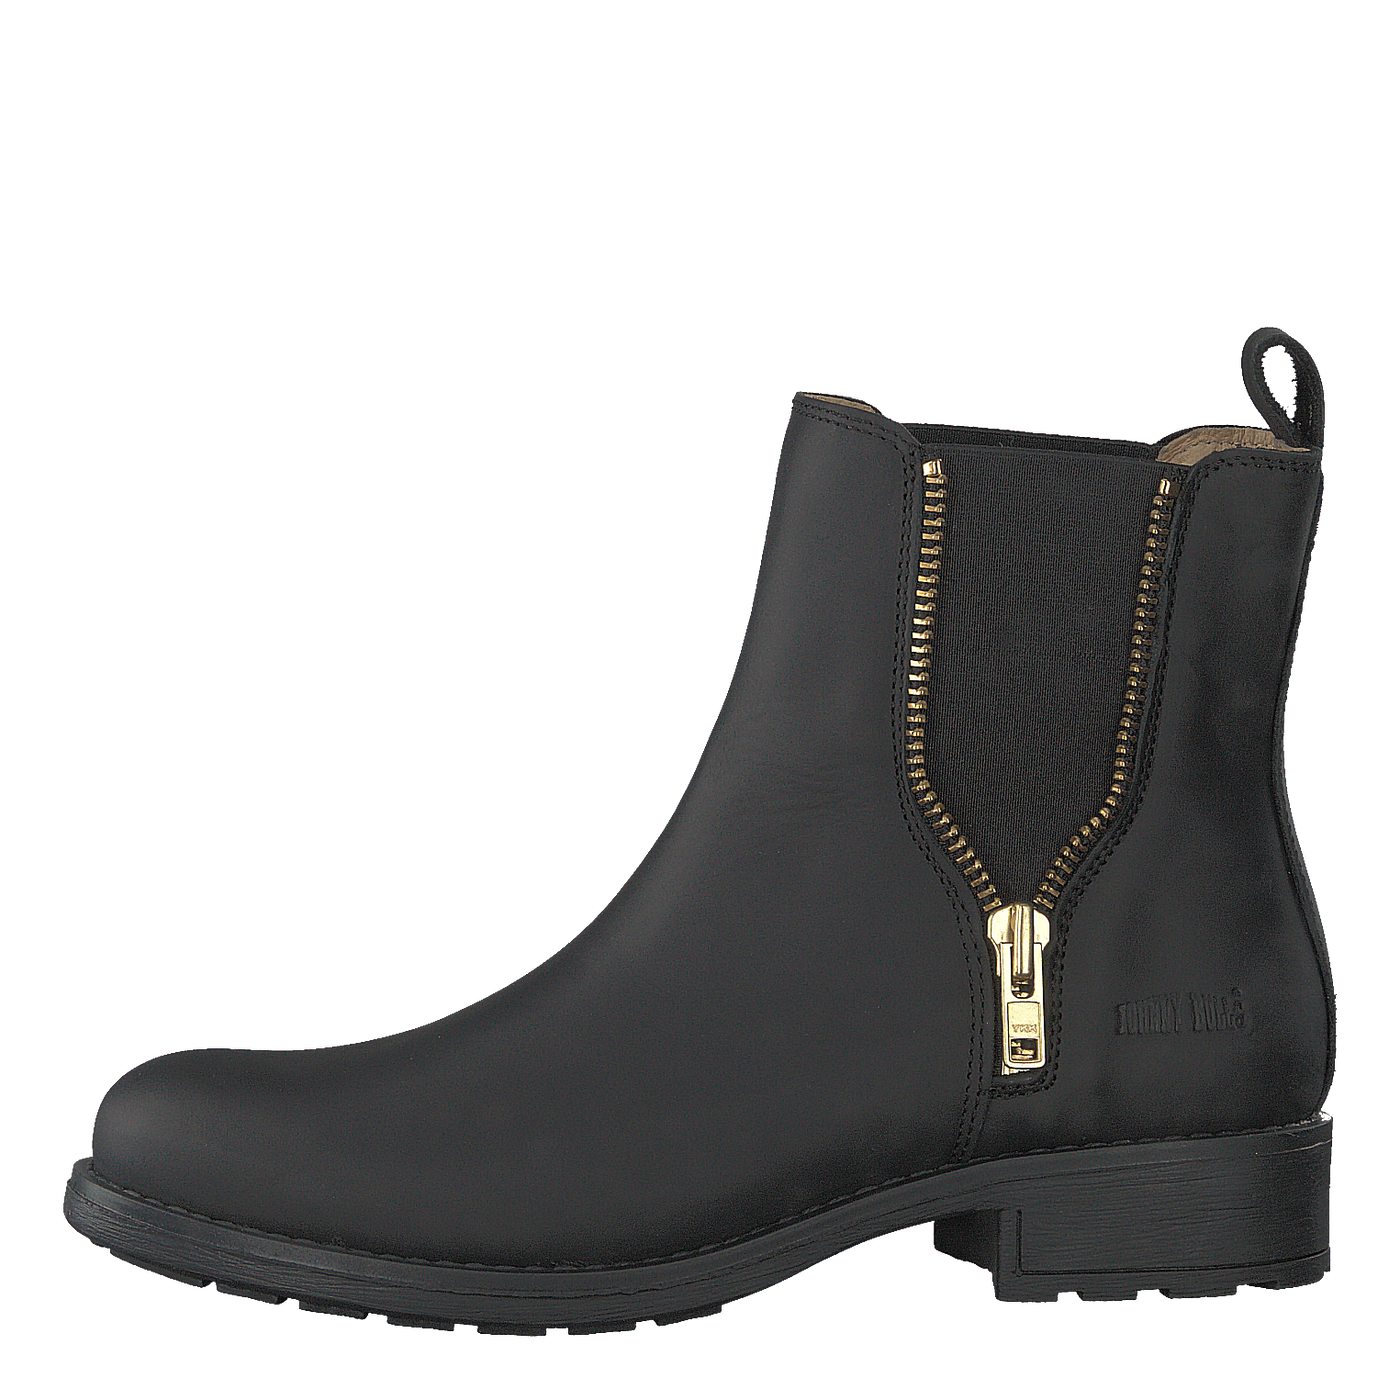 Low Chelsea Boot Black/shiny Gold